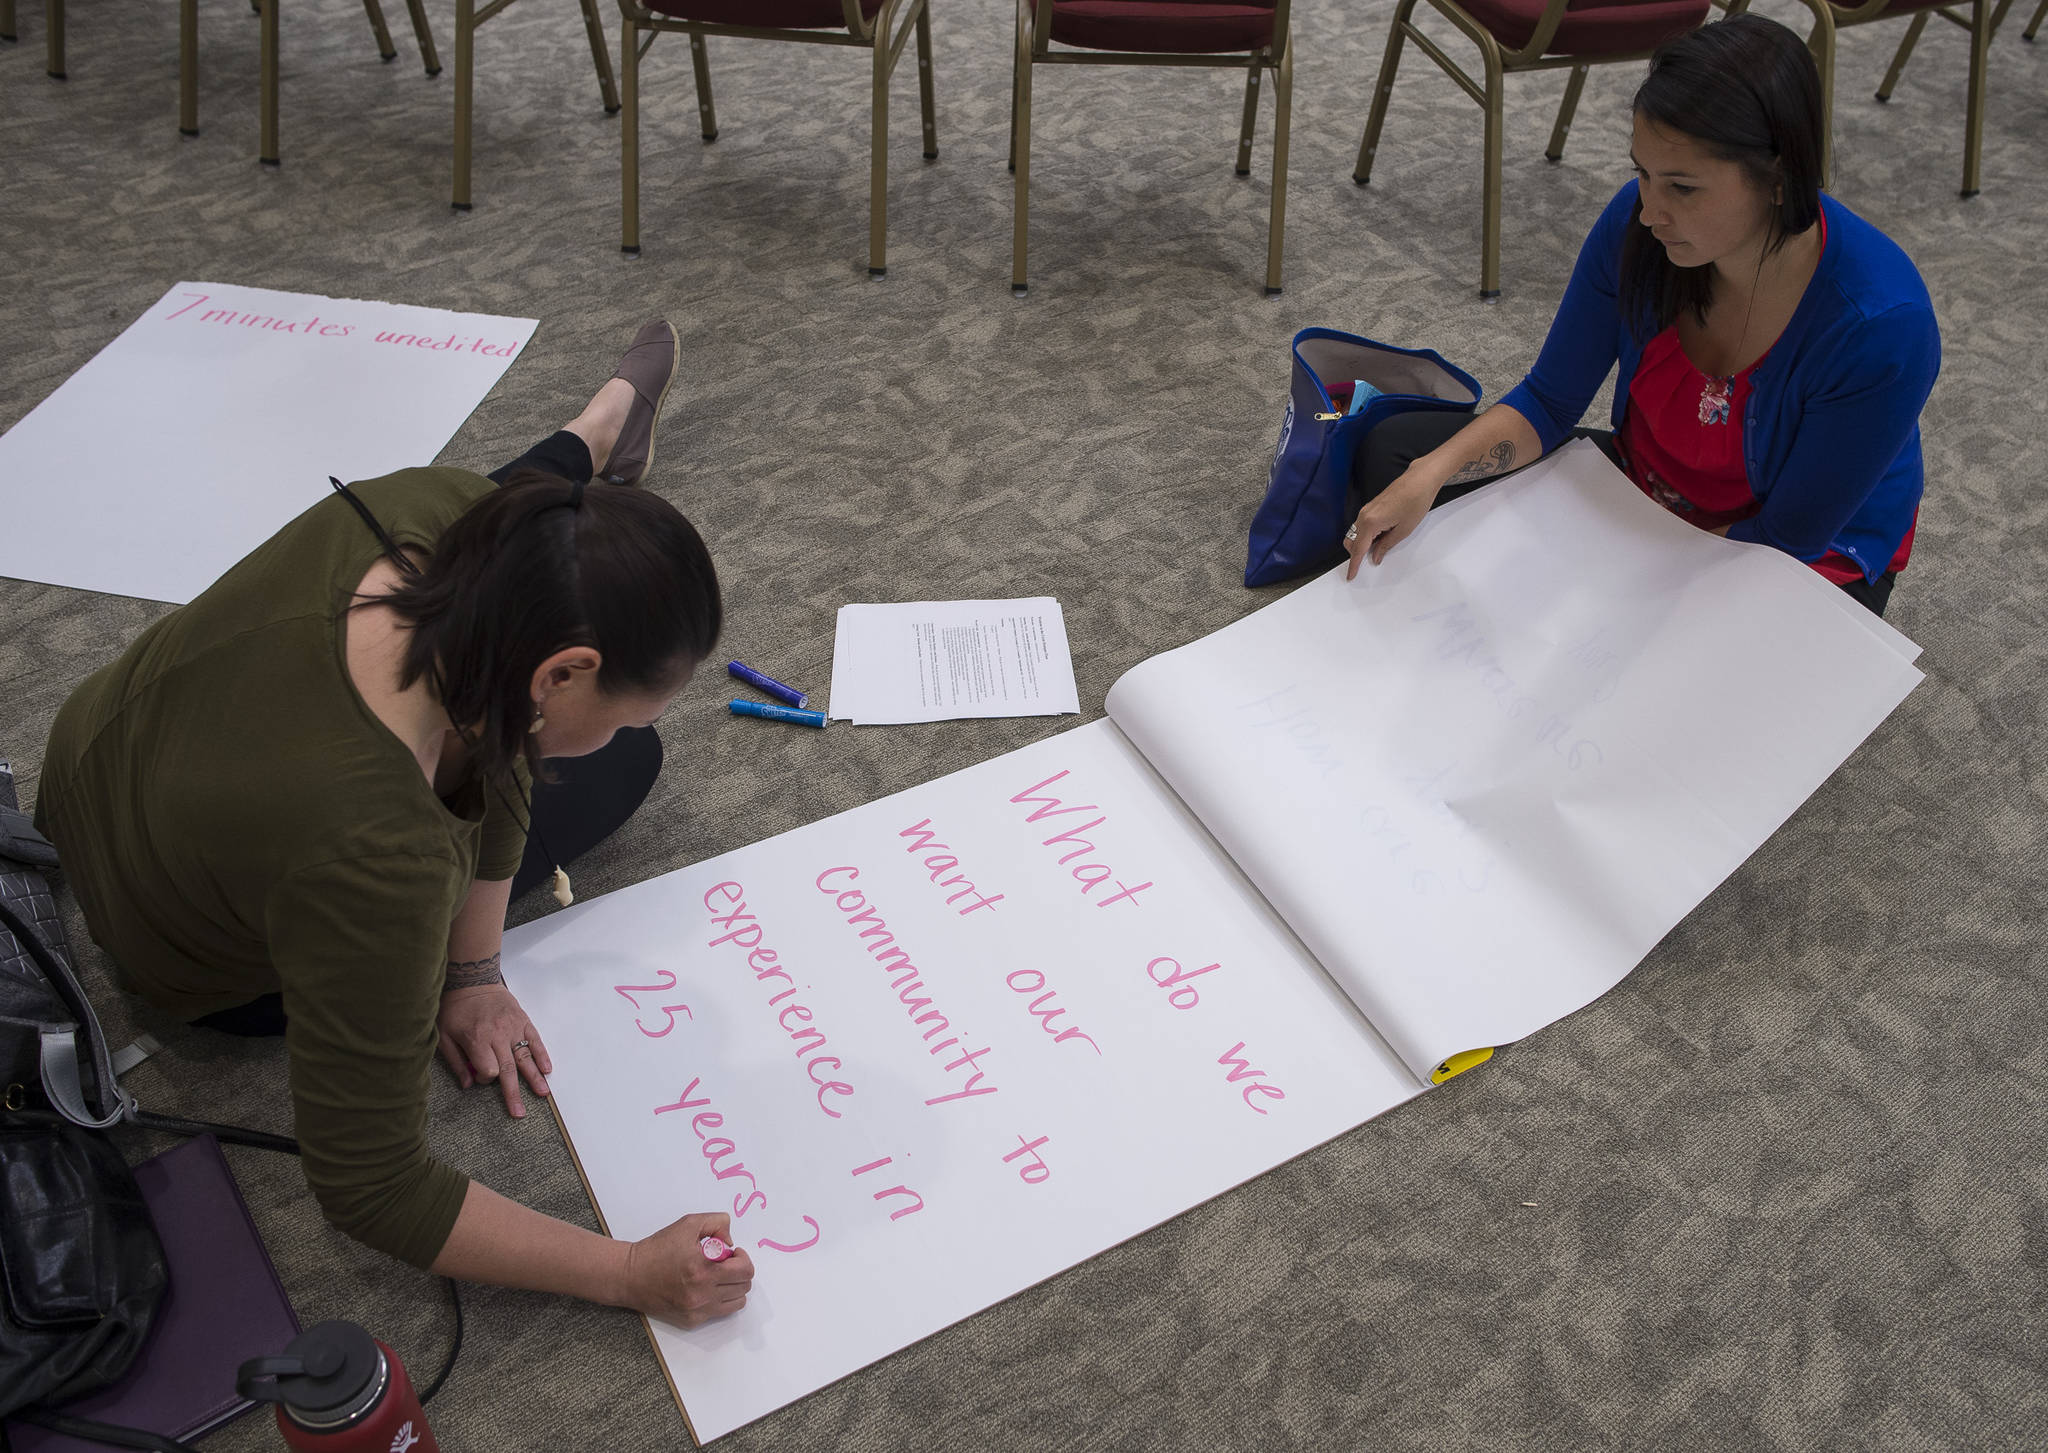 Darlene Trigg and Heather Gatti write out questions before the Wisdom in the Circle meeting at Elizabeth Peratrovich Hall on Monday, June 25, 2018. The event is hosted by Tlingit & Haida, AWARE, and the Juneau Violence Prevention Coalition. (Michael Penn | Juneau Empire)